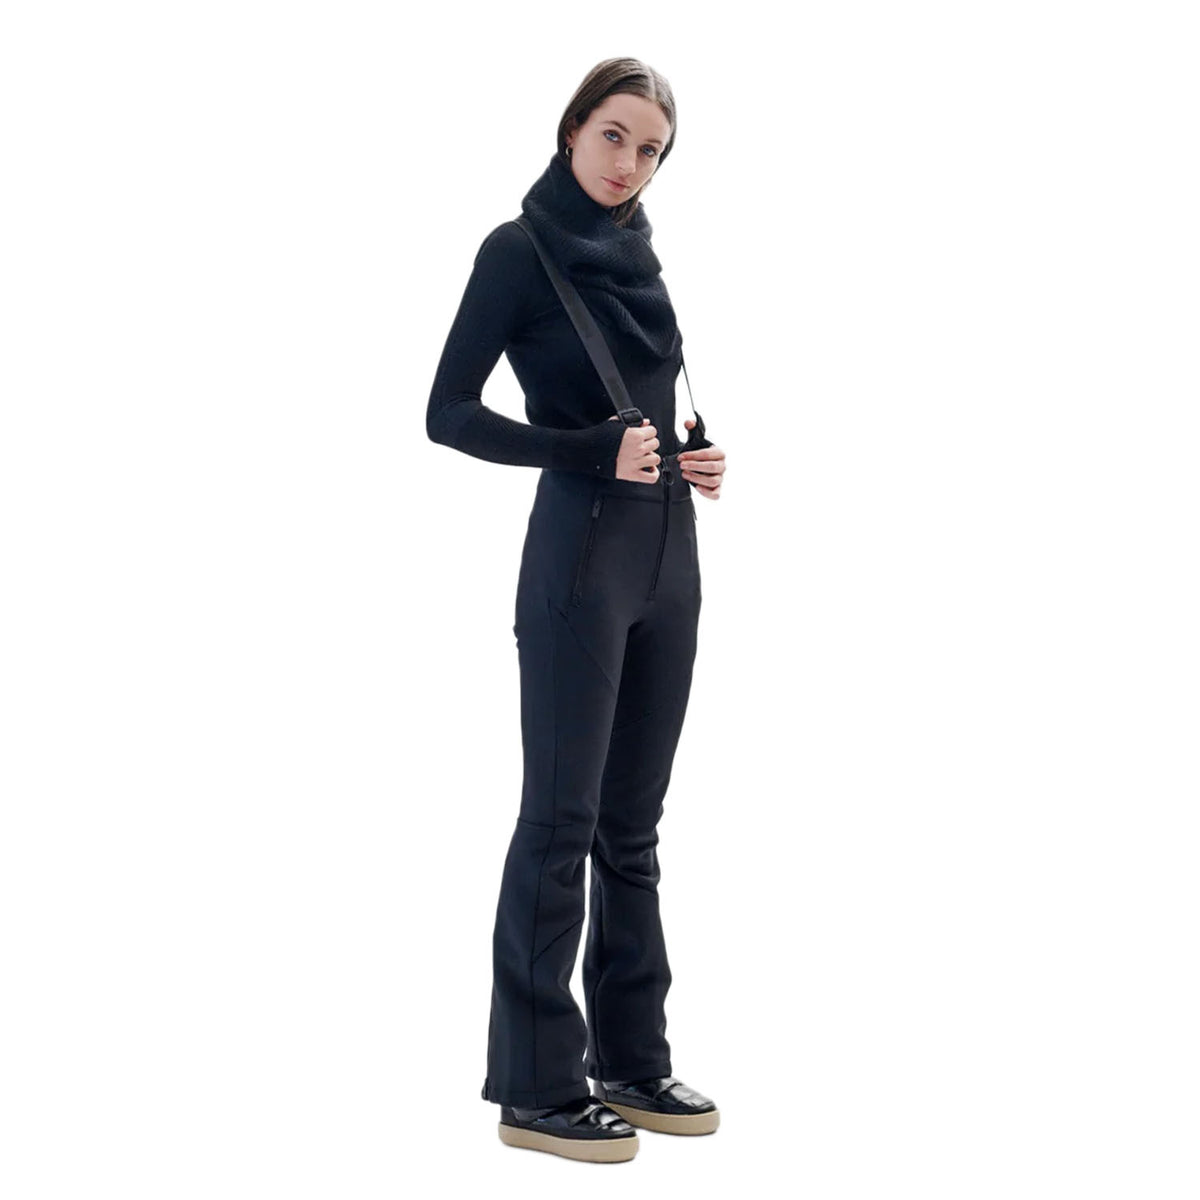 Holden High-Waisted Softshell Pants - Women's